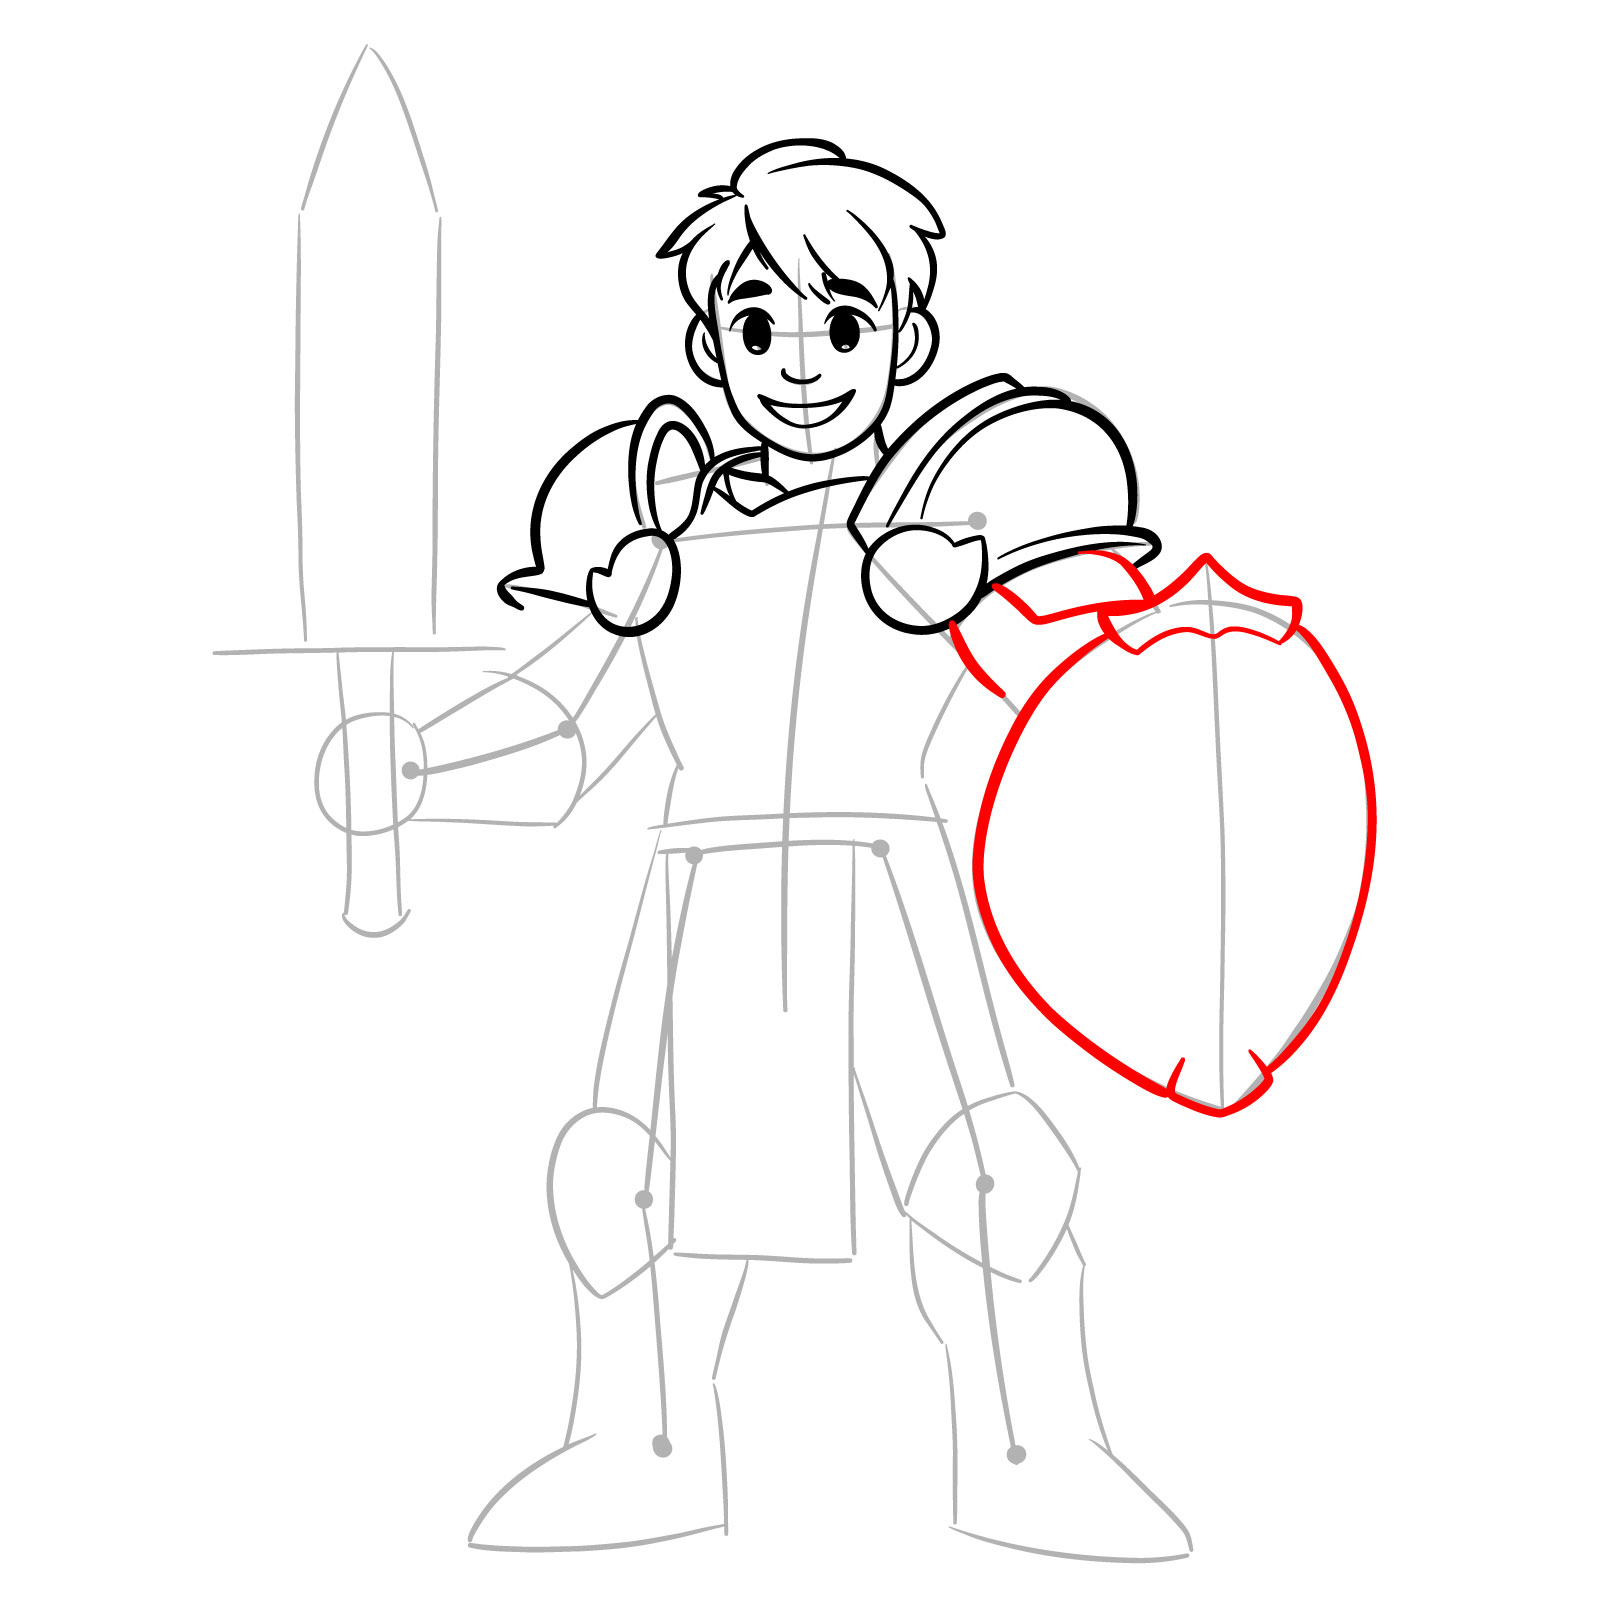 How to draw a paladin step 11: hand and shield outline